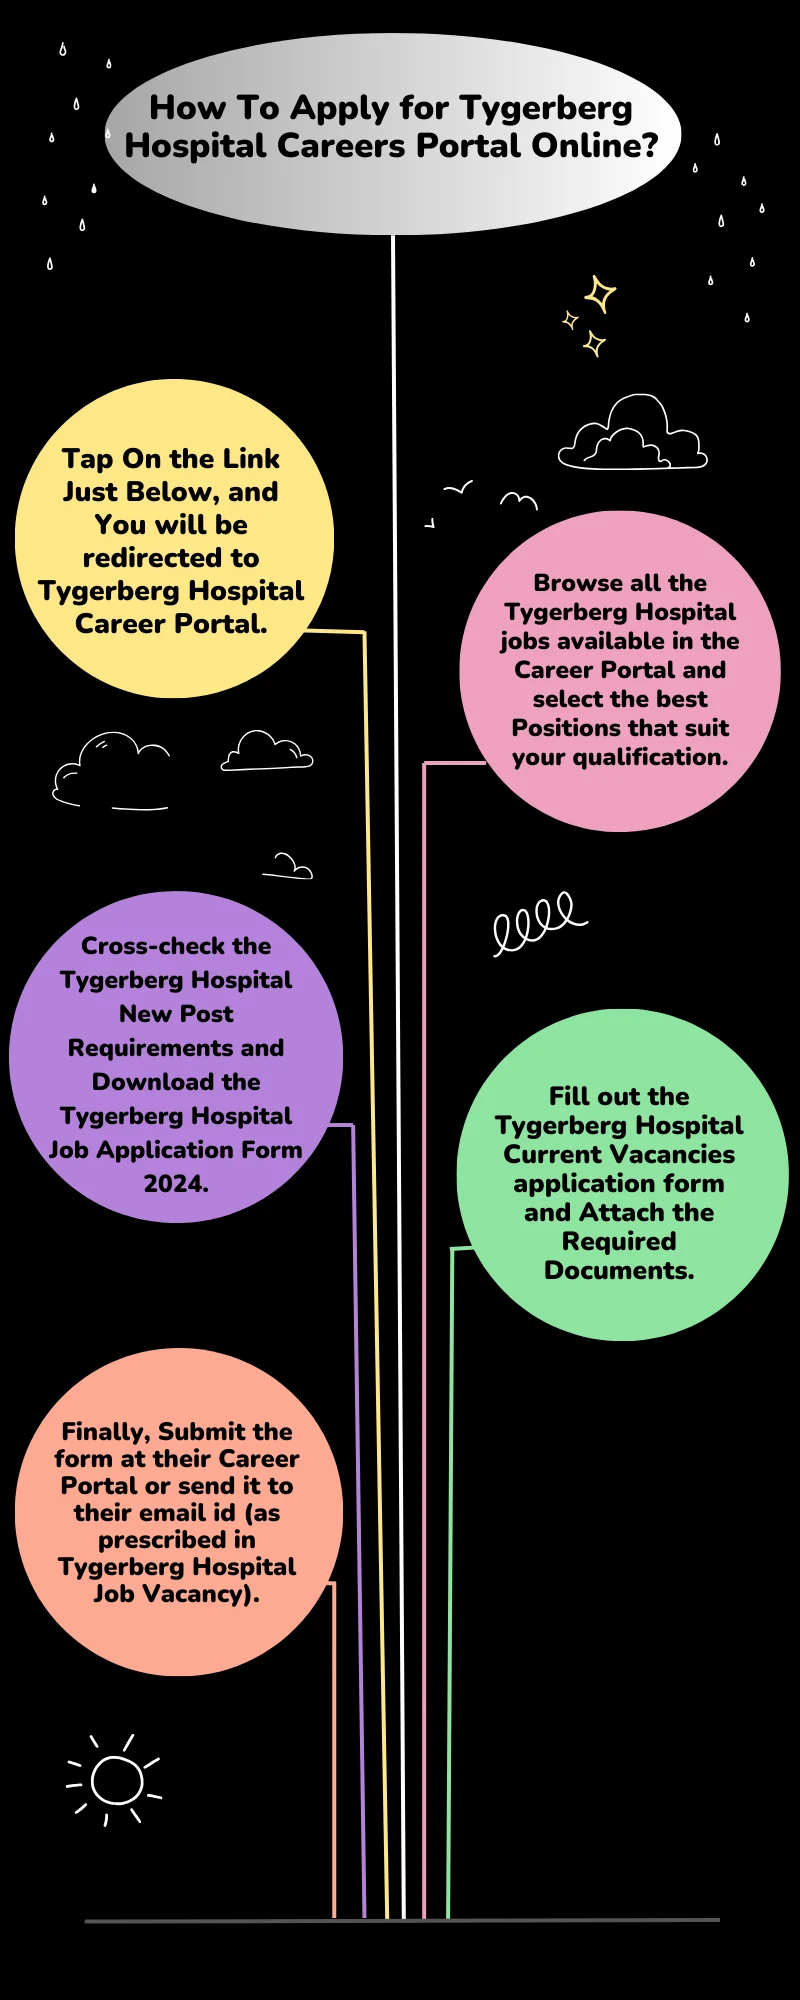 How To Apply for Tygerberg Hospital Careers Portal Online?